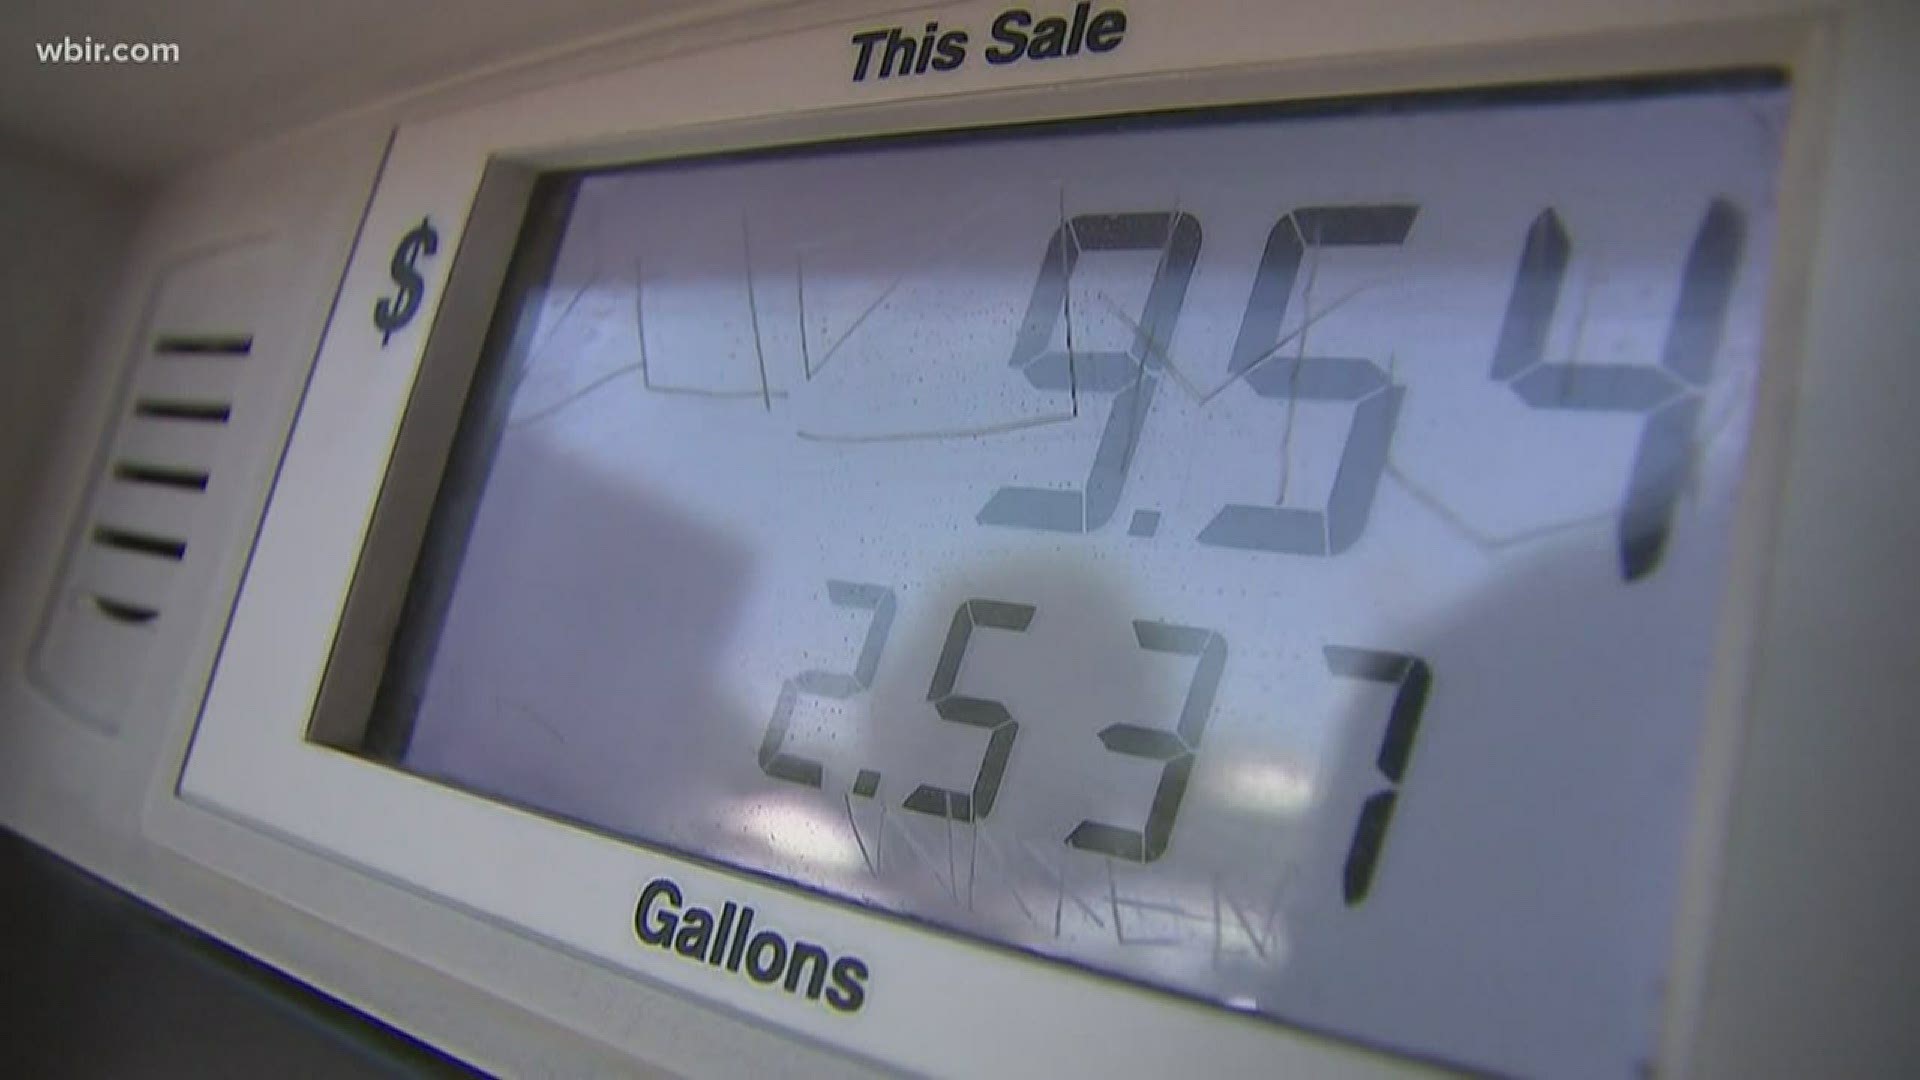 The average gas price in Knoxville is $1.56. Last year at the same time is was one dollar higher at $2.55 per gallon.